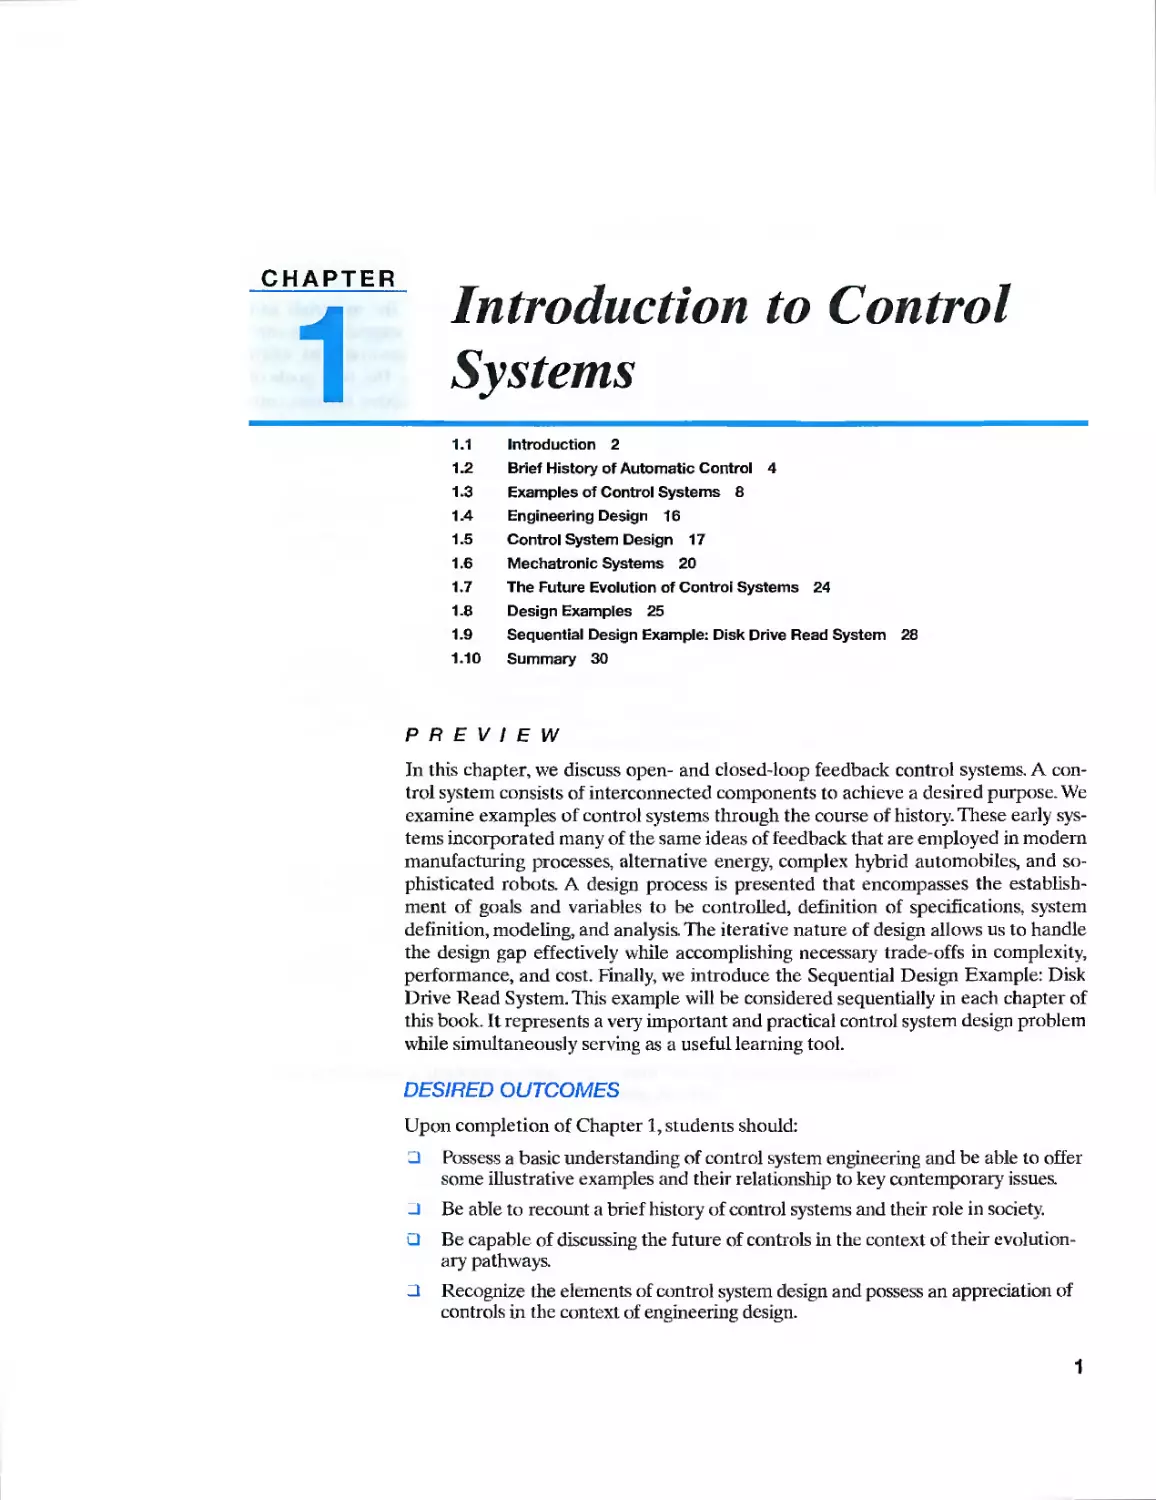 1 Introduction to Control Systems